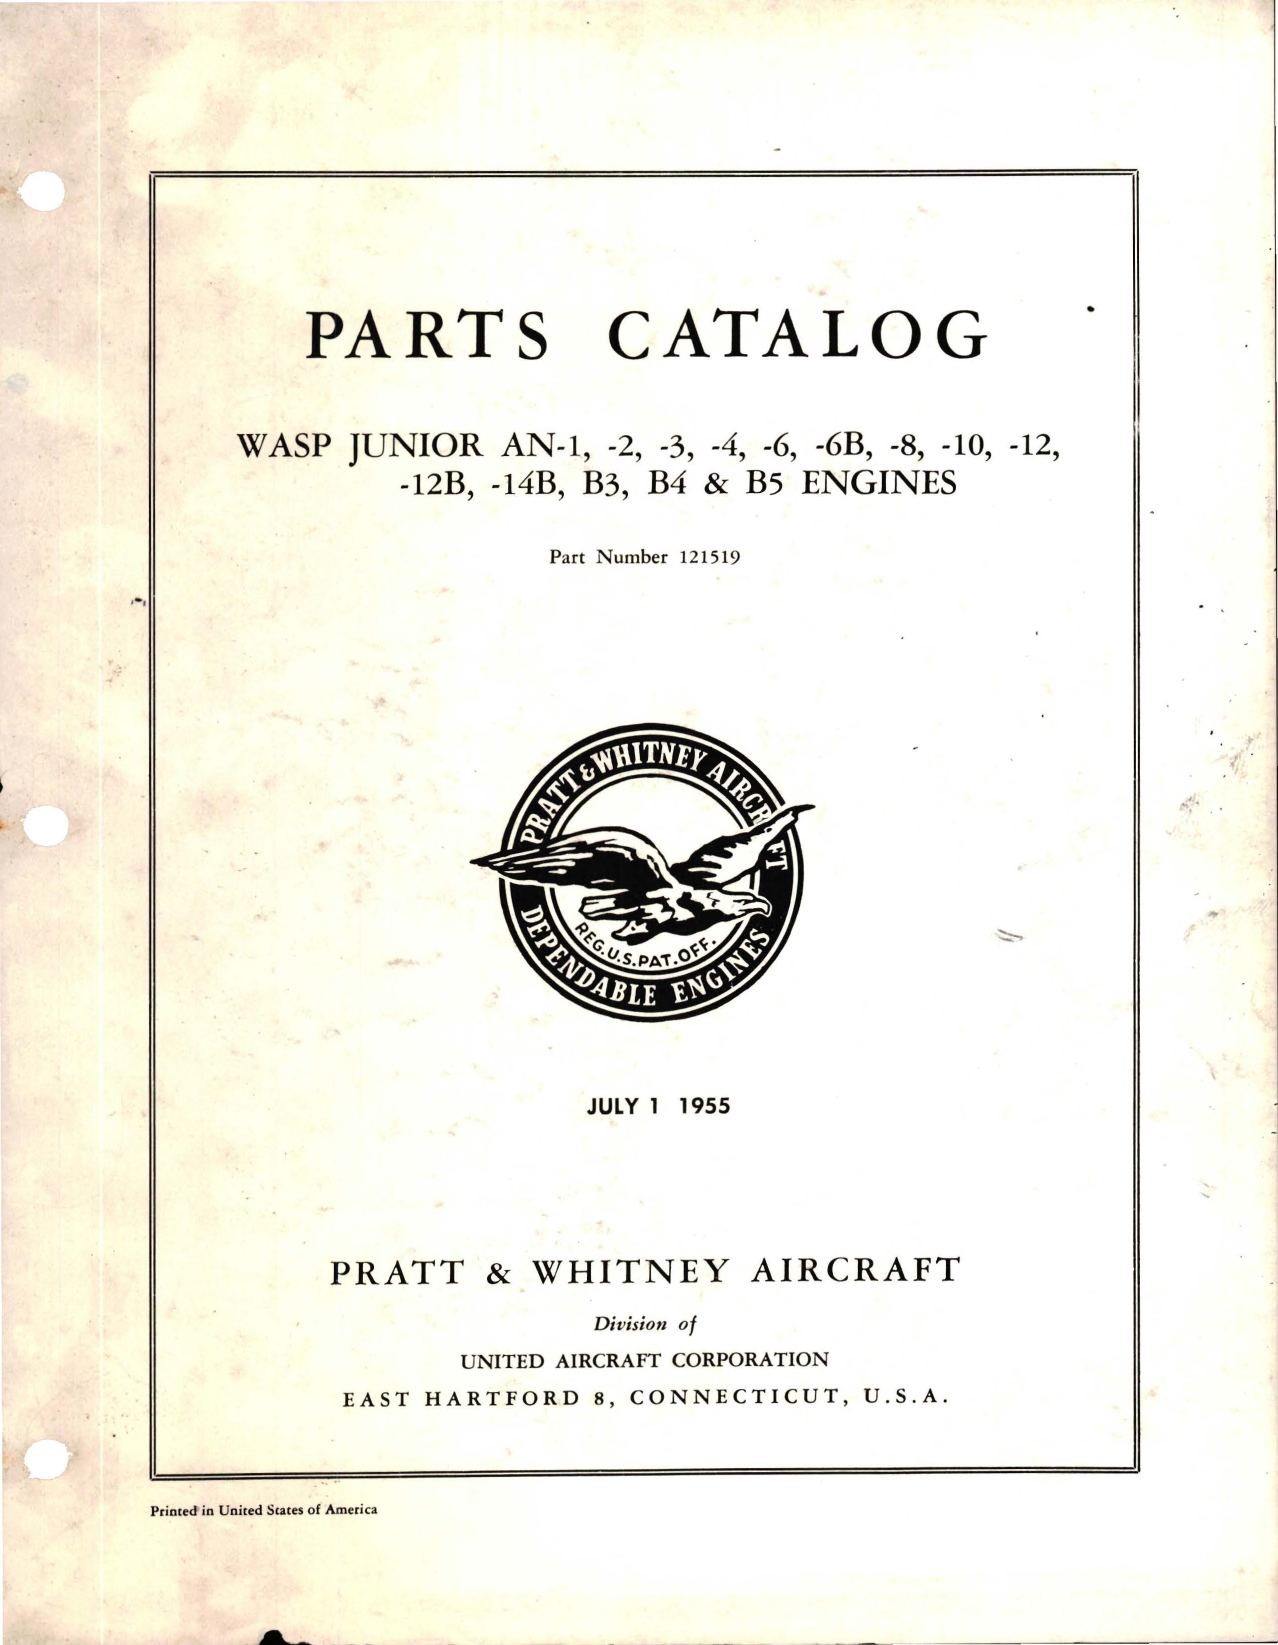 Sample page 1 from AirCorps Library document: Parts Catalog for Wasp Junior - AN-1, AN-2, AN-3, AN-4, AN-6, AN-6B, AN-8, AN-10, AN-12, AN-12B, AN-14B, B3, B4, B5